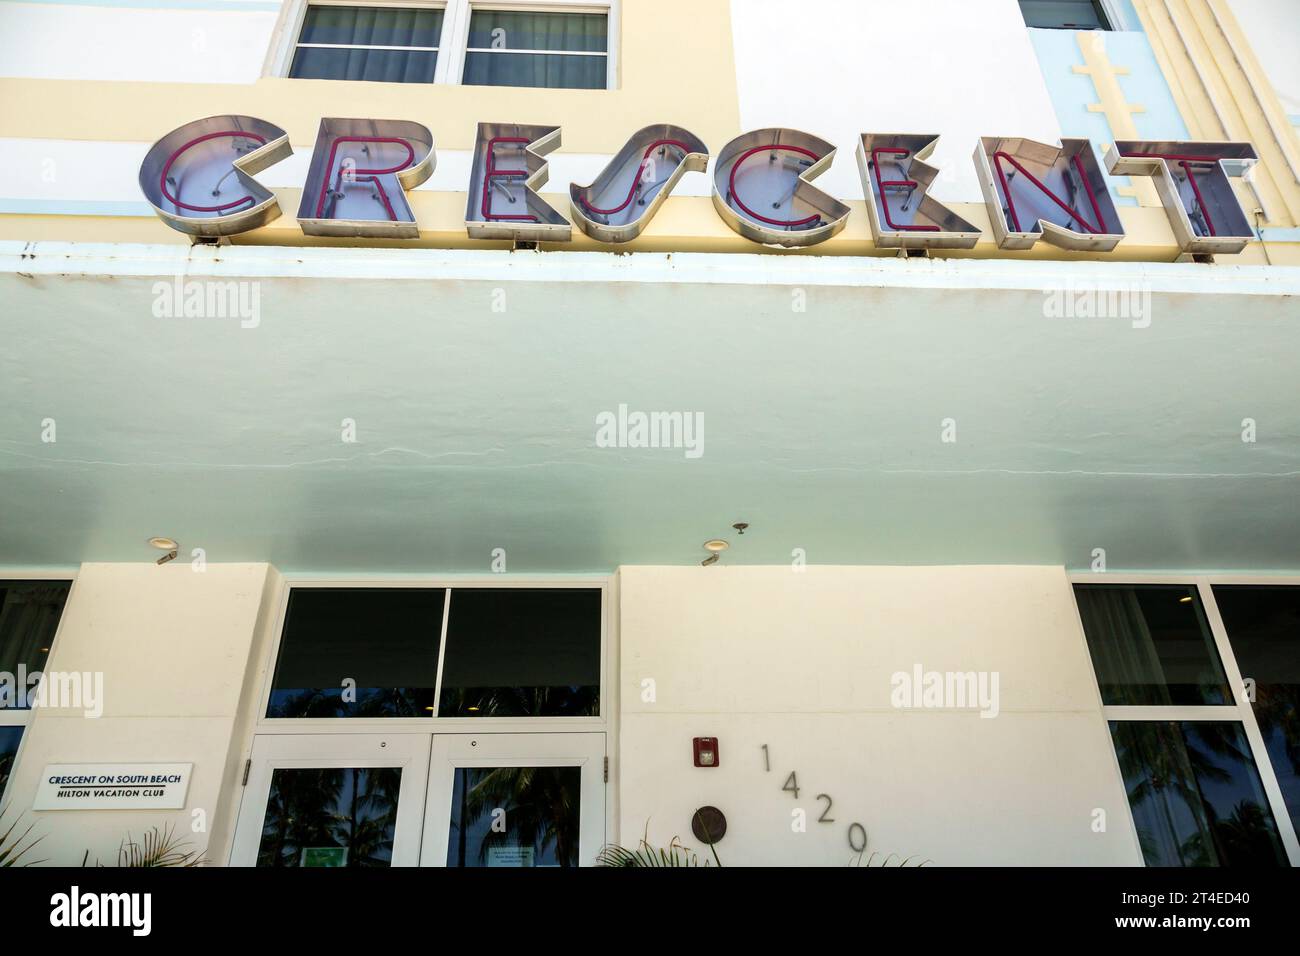 Miami Beach Florida,outside exterior,building front entrance hotel,Ocean Drive Hilton Vacation Club Crescent on South Beach Miami sign,hotels motels b Stock Photo